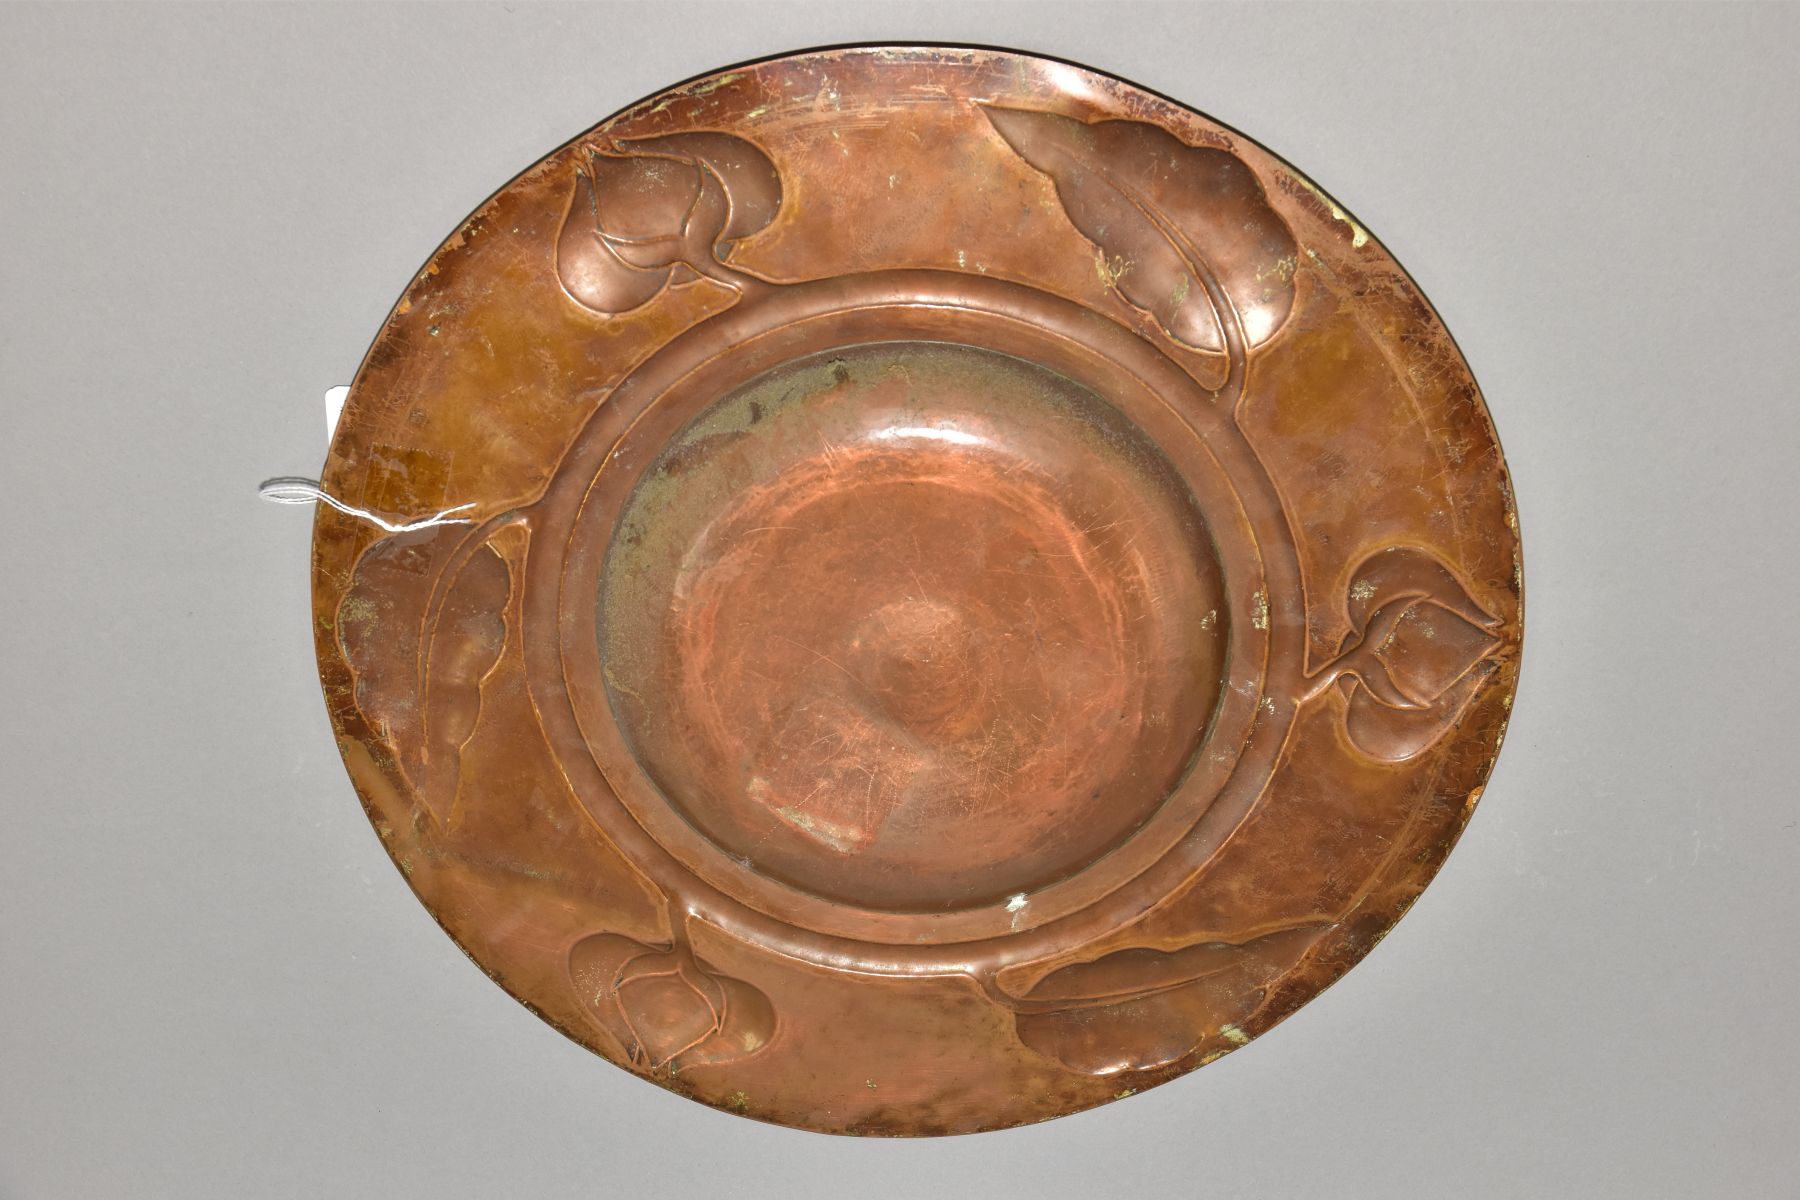 AN ARTS AND CRAFTS STYLE COPPER CHARGER, embossed with a band of foliate motifs, the central - Image 7 of 8